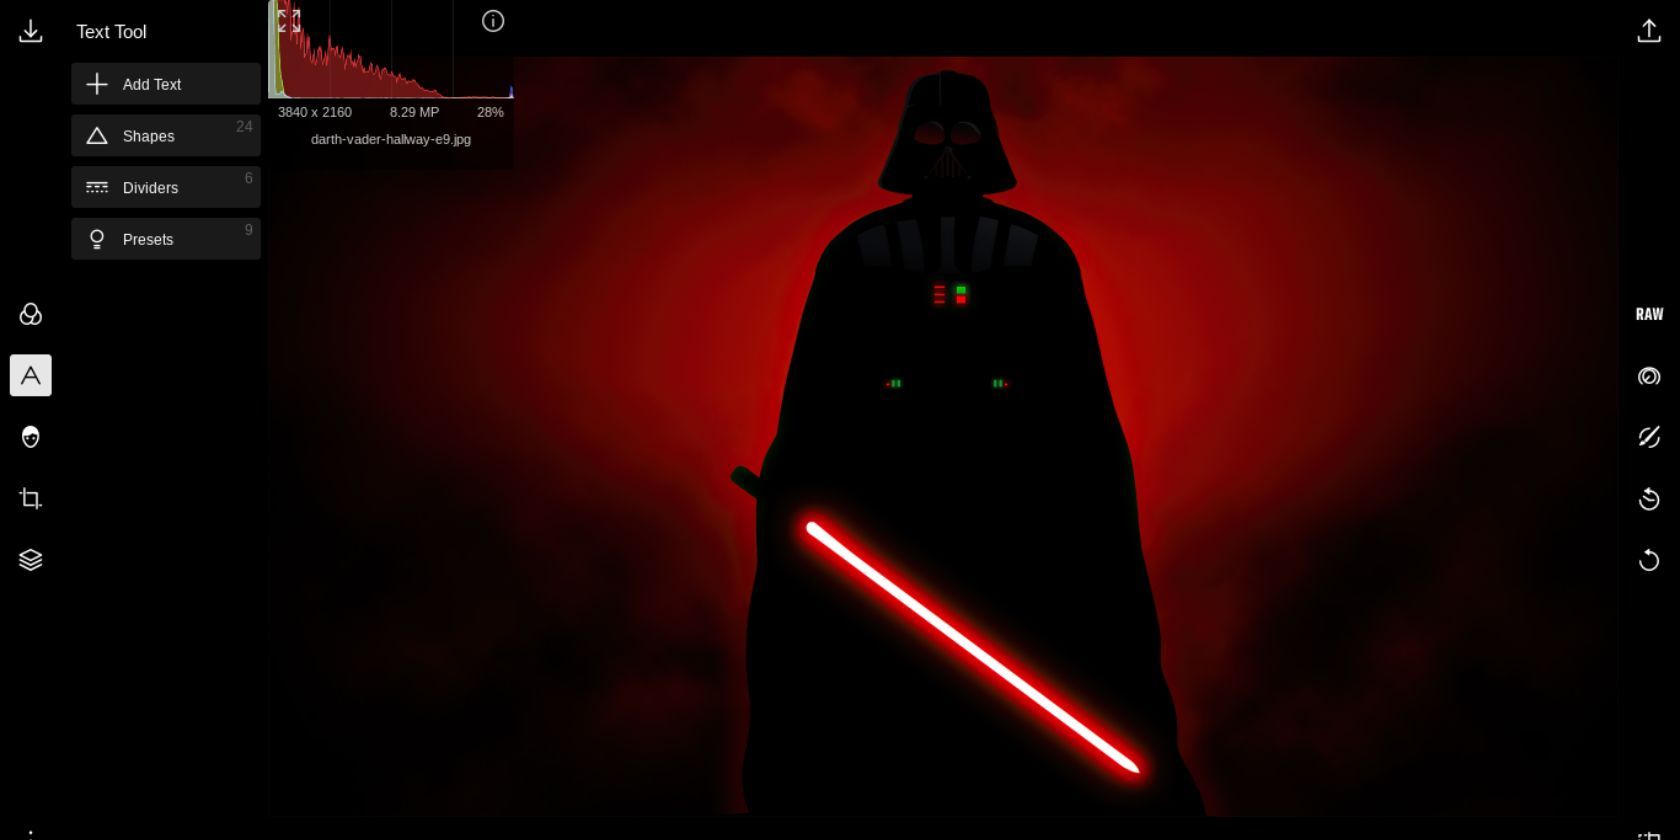 An image of Vader on the image editing platform Polarr